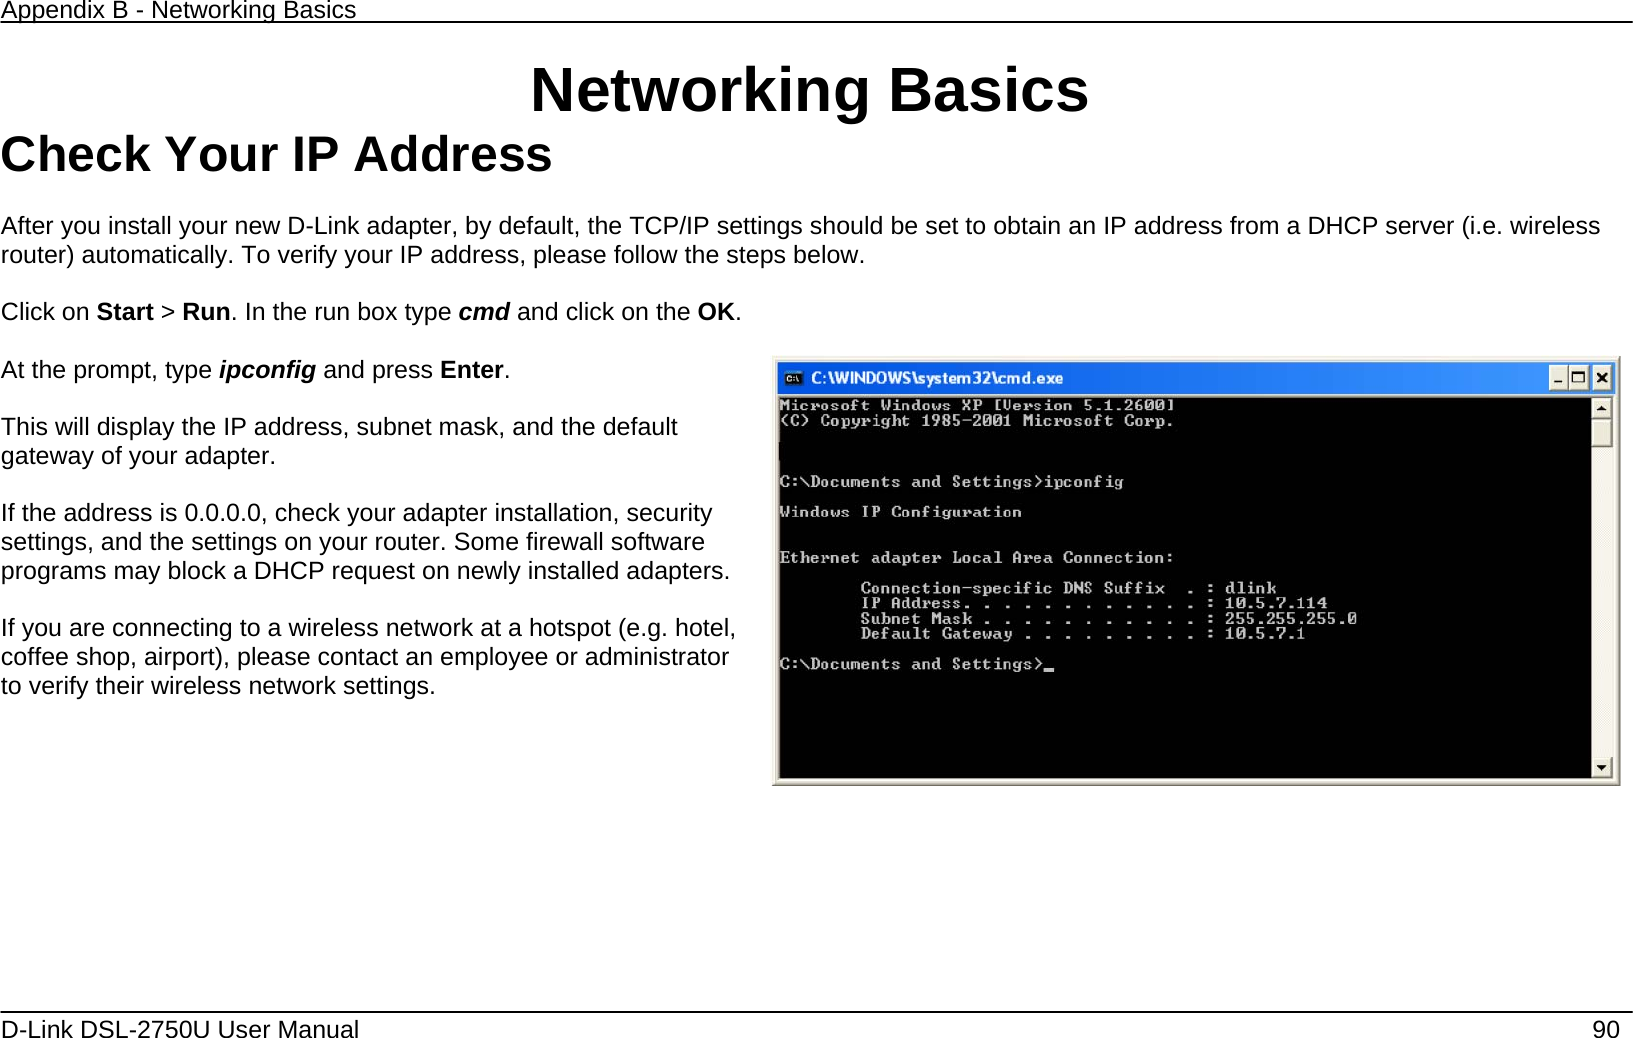 Appendix B - Networking Basics   D-Link DSL-2750U User Manual    90 Networking Basics Check Your IP Address  After you install your new D-Link adapter, by default, the TCP/IP settings should be set to obtain an IP address from a DHCP server (i.e. wireless router) automatically. To verify your IP address, please follow the steps below.  Click on Start &gt; Run. In the run box type cmd and click on the OK.  At the prompt, type ipconfig and press Enter.  This will display the IP address, subnet mask, and the default gateway of your adapter.  If the address is 0.0.0.0, check your adapter installation, security settings, and the settings on your router. Some firewall software programs may block a DHCP request on newly installed adapters.  If you are connecting to a wireless network at a hotspot (e.g. hotel, coffee shop, airport), please contact an employee or administrator to verify their wireless network settings.    